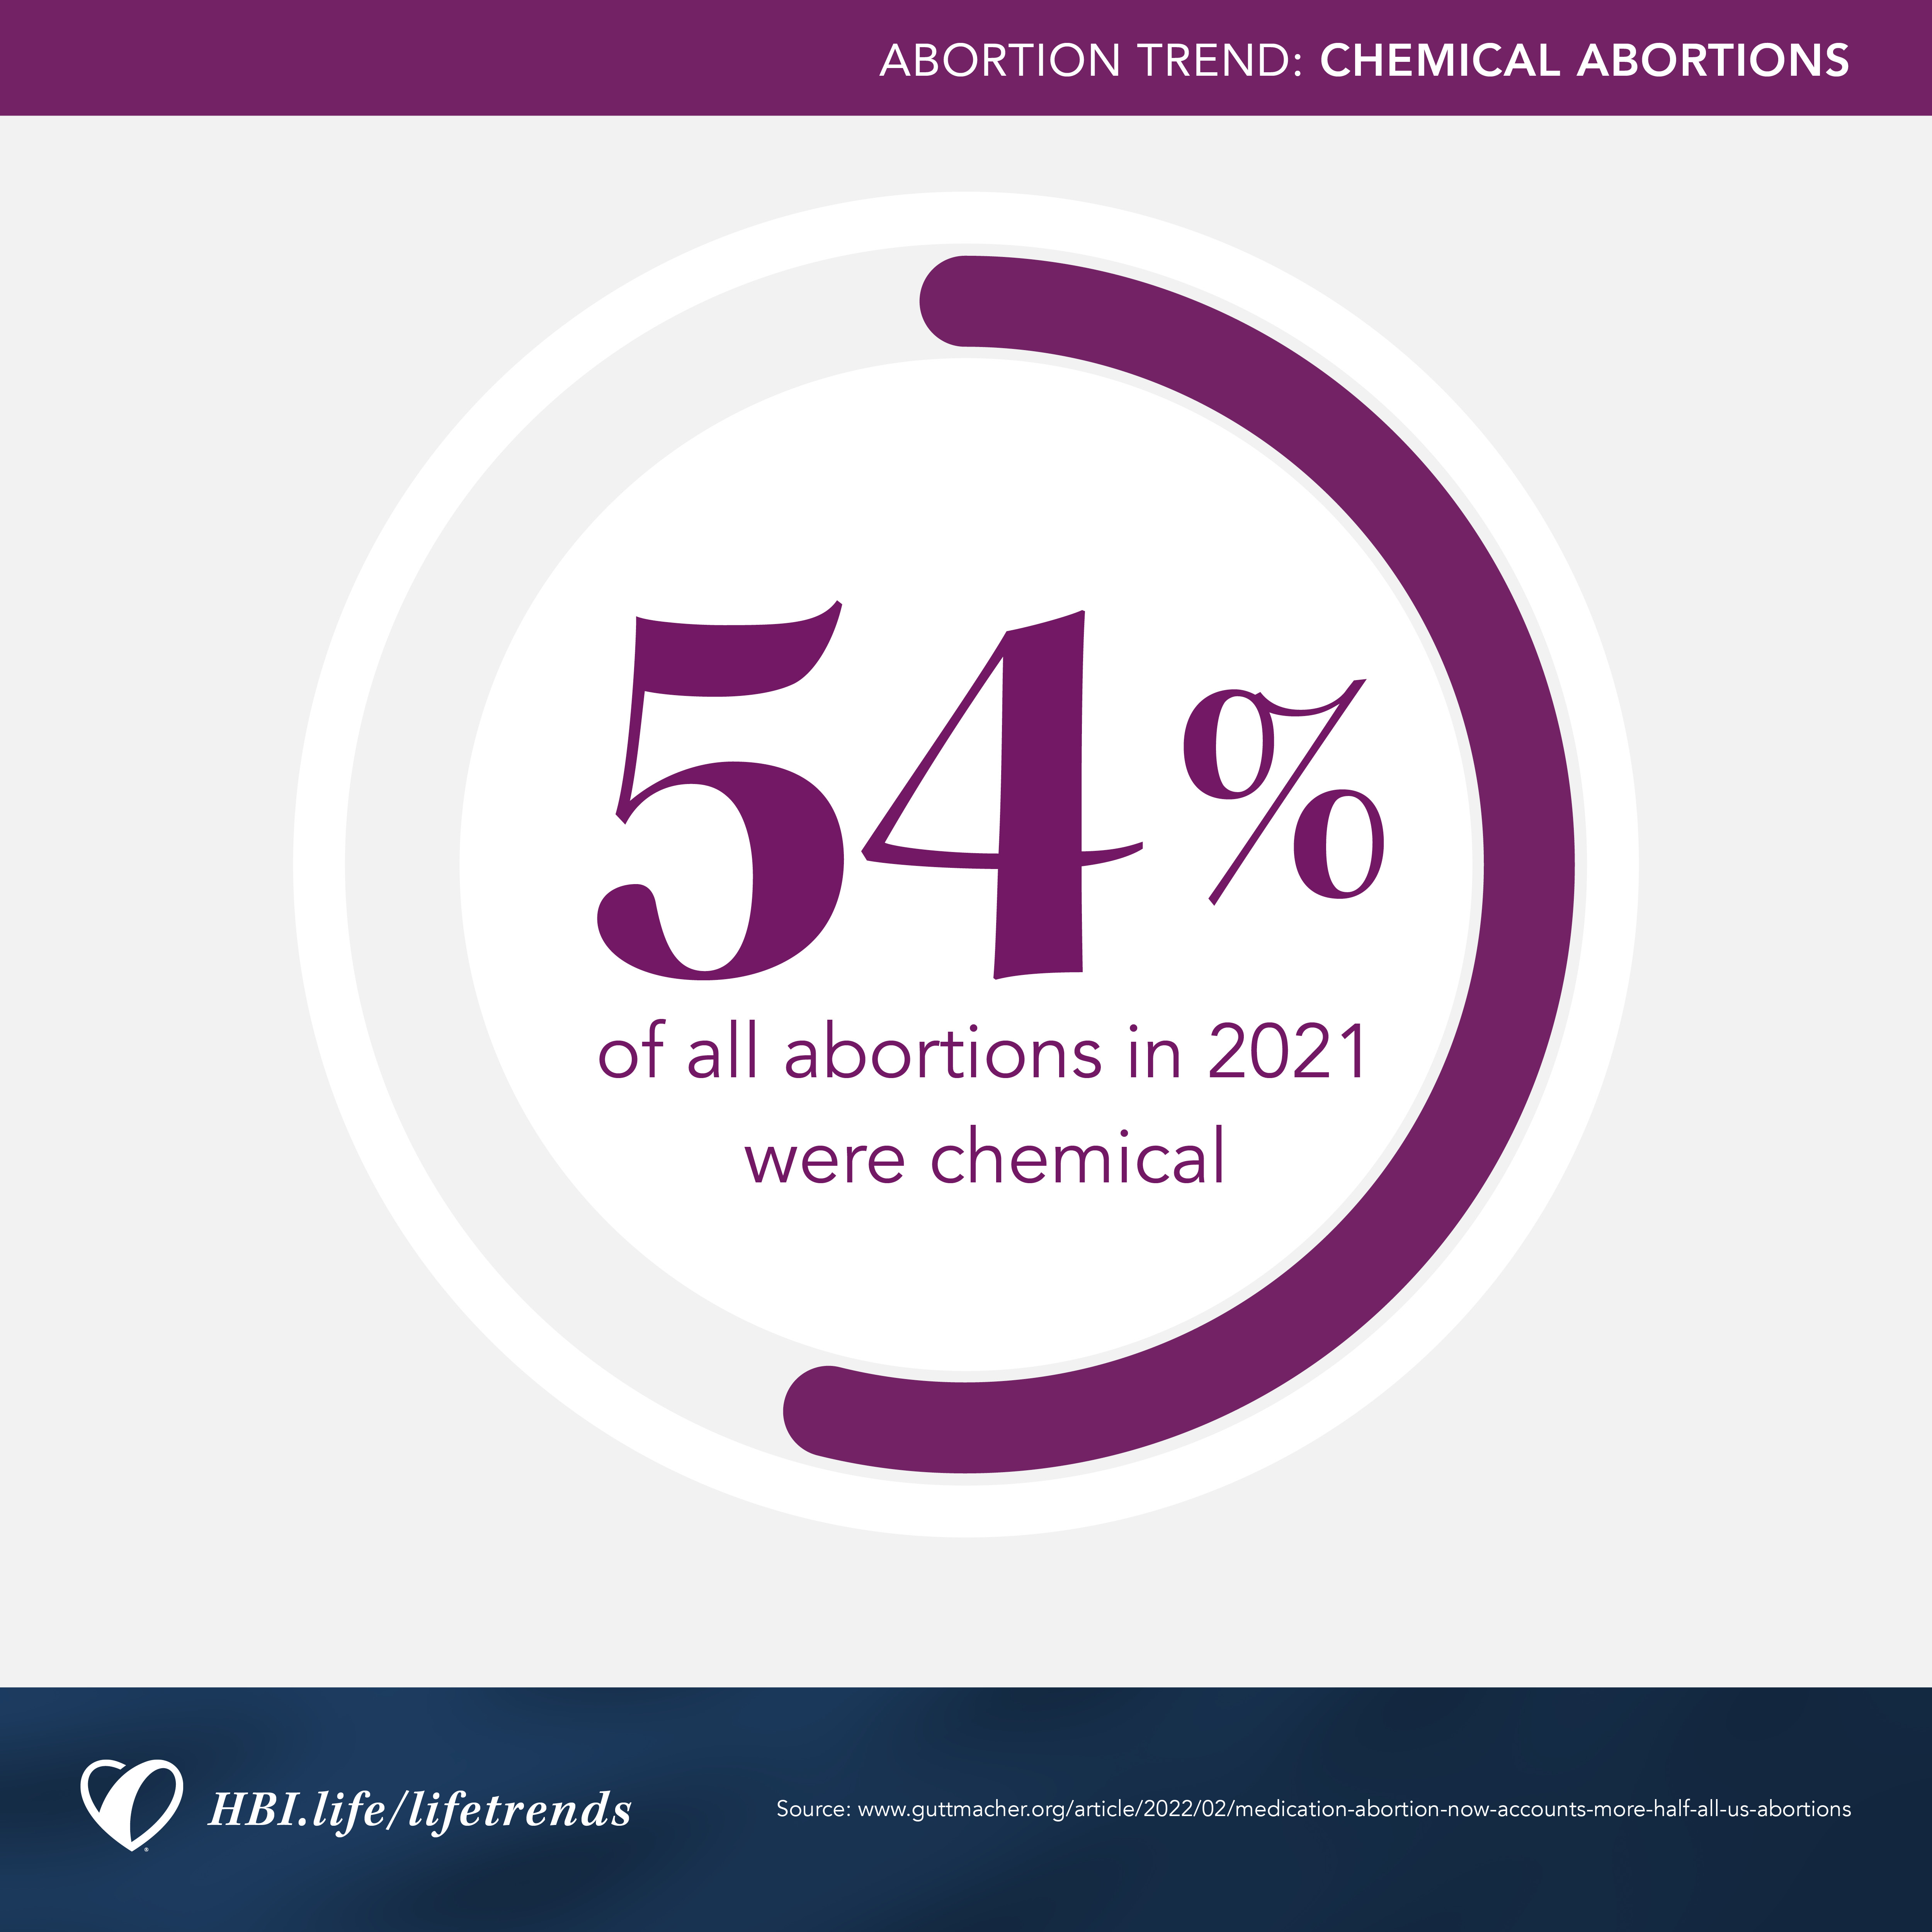 Chemical abortions are an increasingly used method of abortion